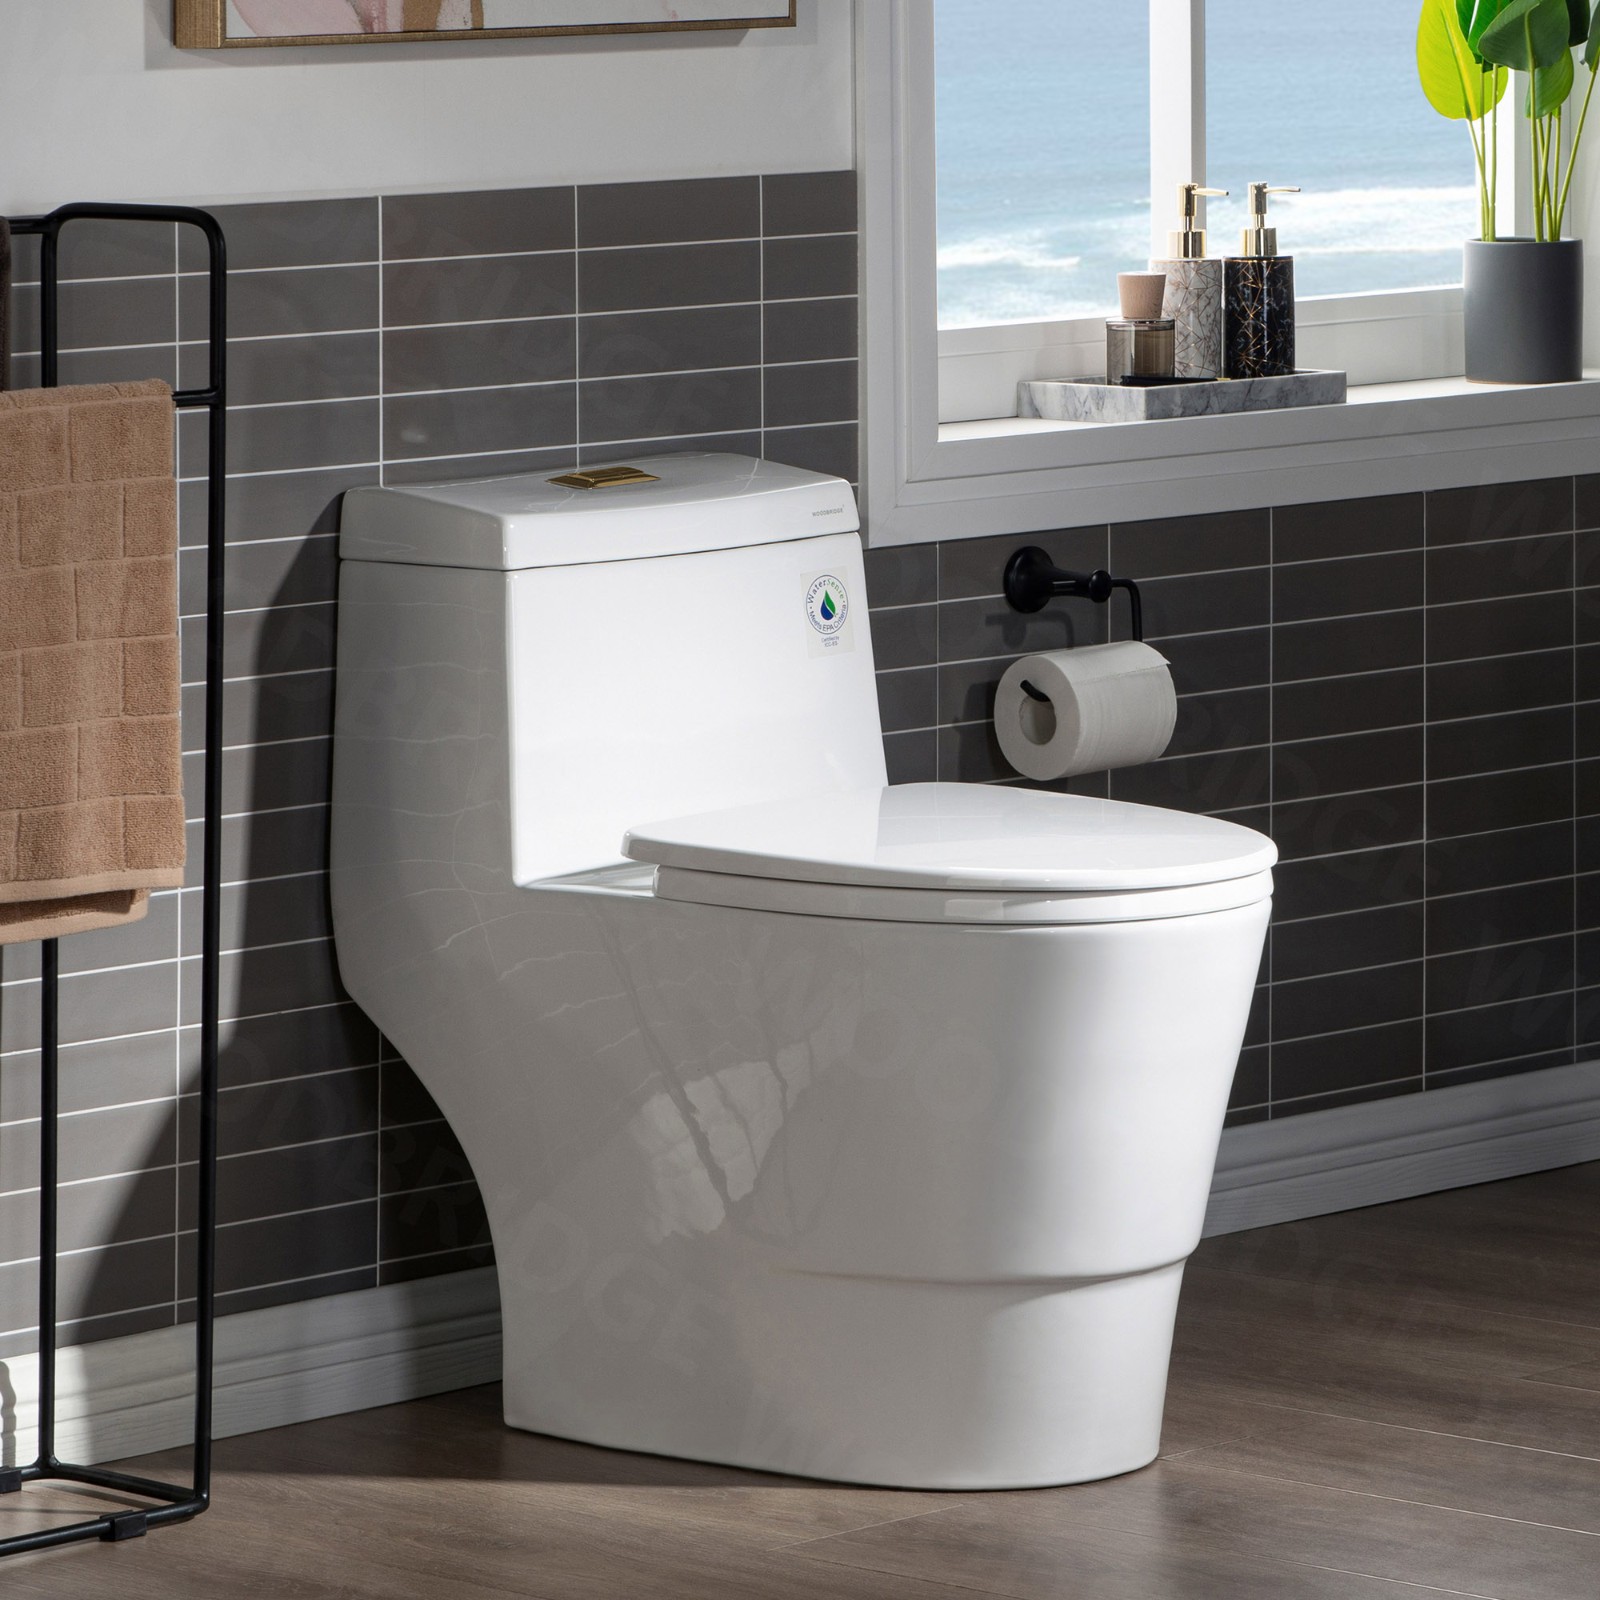  WOODBRIDGEE One Piece Toilet with Soft Closing Seat, Chair Height, 1.28 GPF Dual, Water Sensed, 1000 Gram MaP Flushing Score Toilet with Brushed Gold Button T0001-BG, White_5722